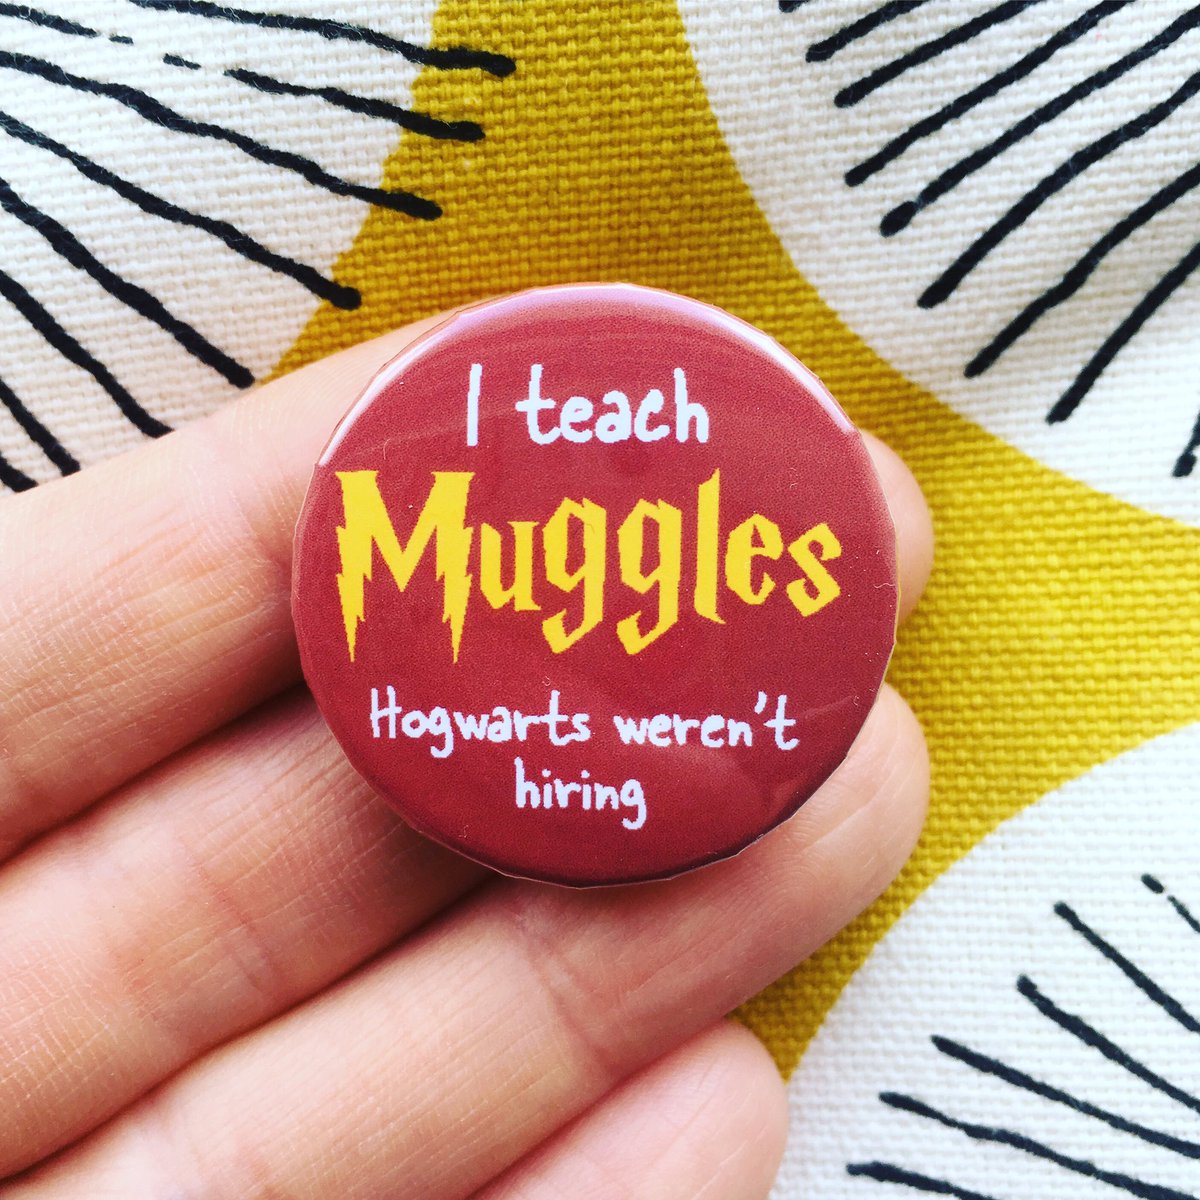 This little button badge makes a fun thank you gift for your child’s hardworking teacher.

#iteachmuggles #muggles #harrypotter #teachergifts #teacherappreciation #thankyouteachergift #thankyouteacher #buttonbadge #endoftermgifts #endofyeargifts #endofschoolyear #etsyseller #etsy